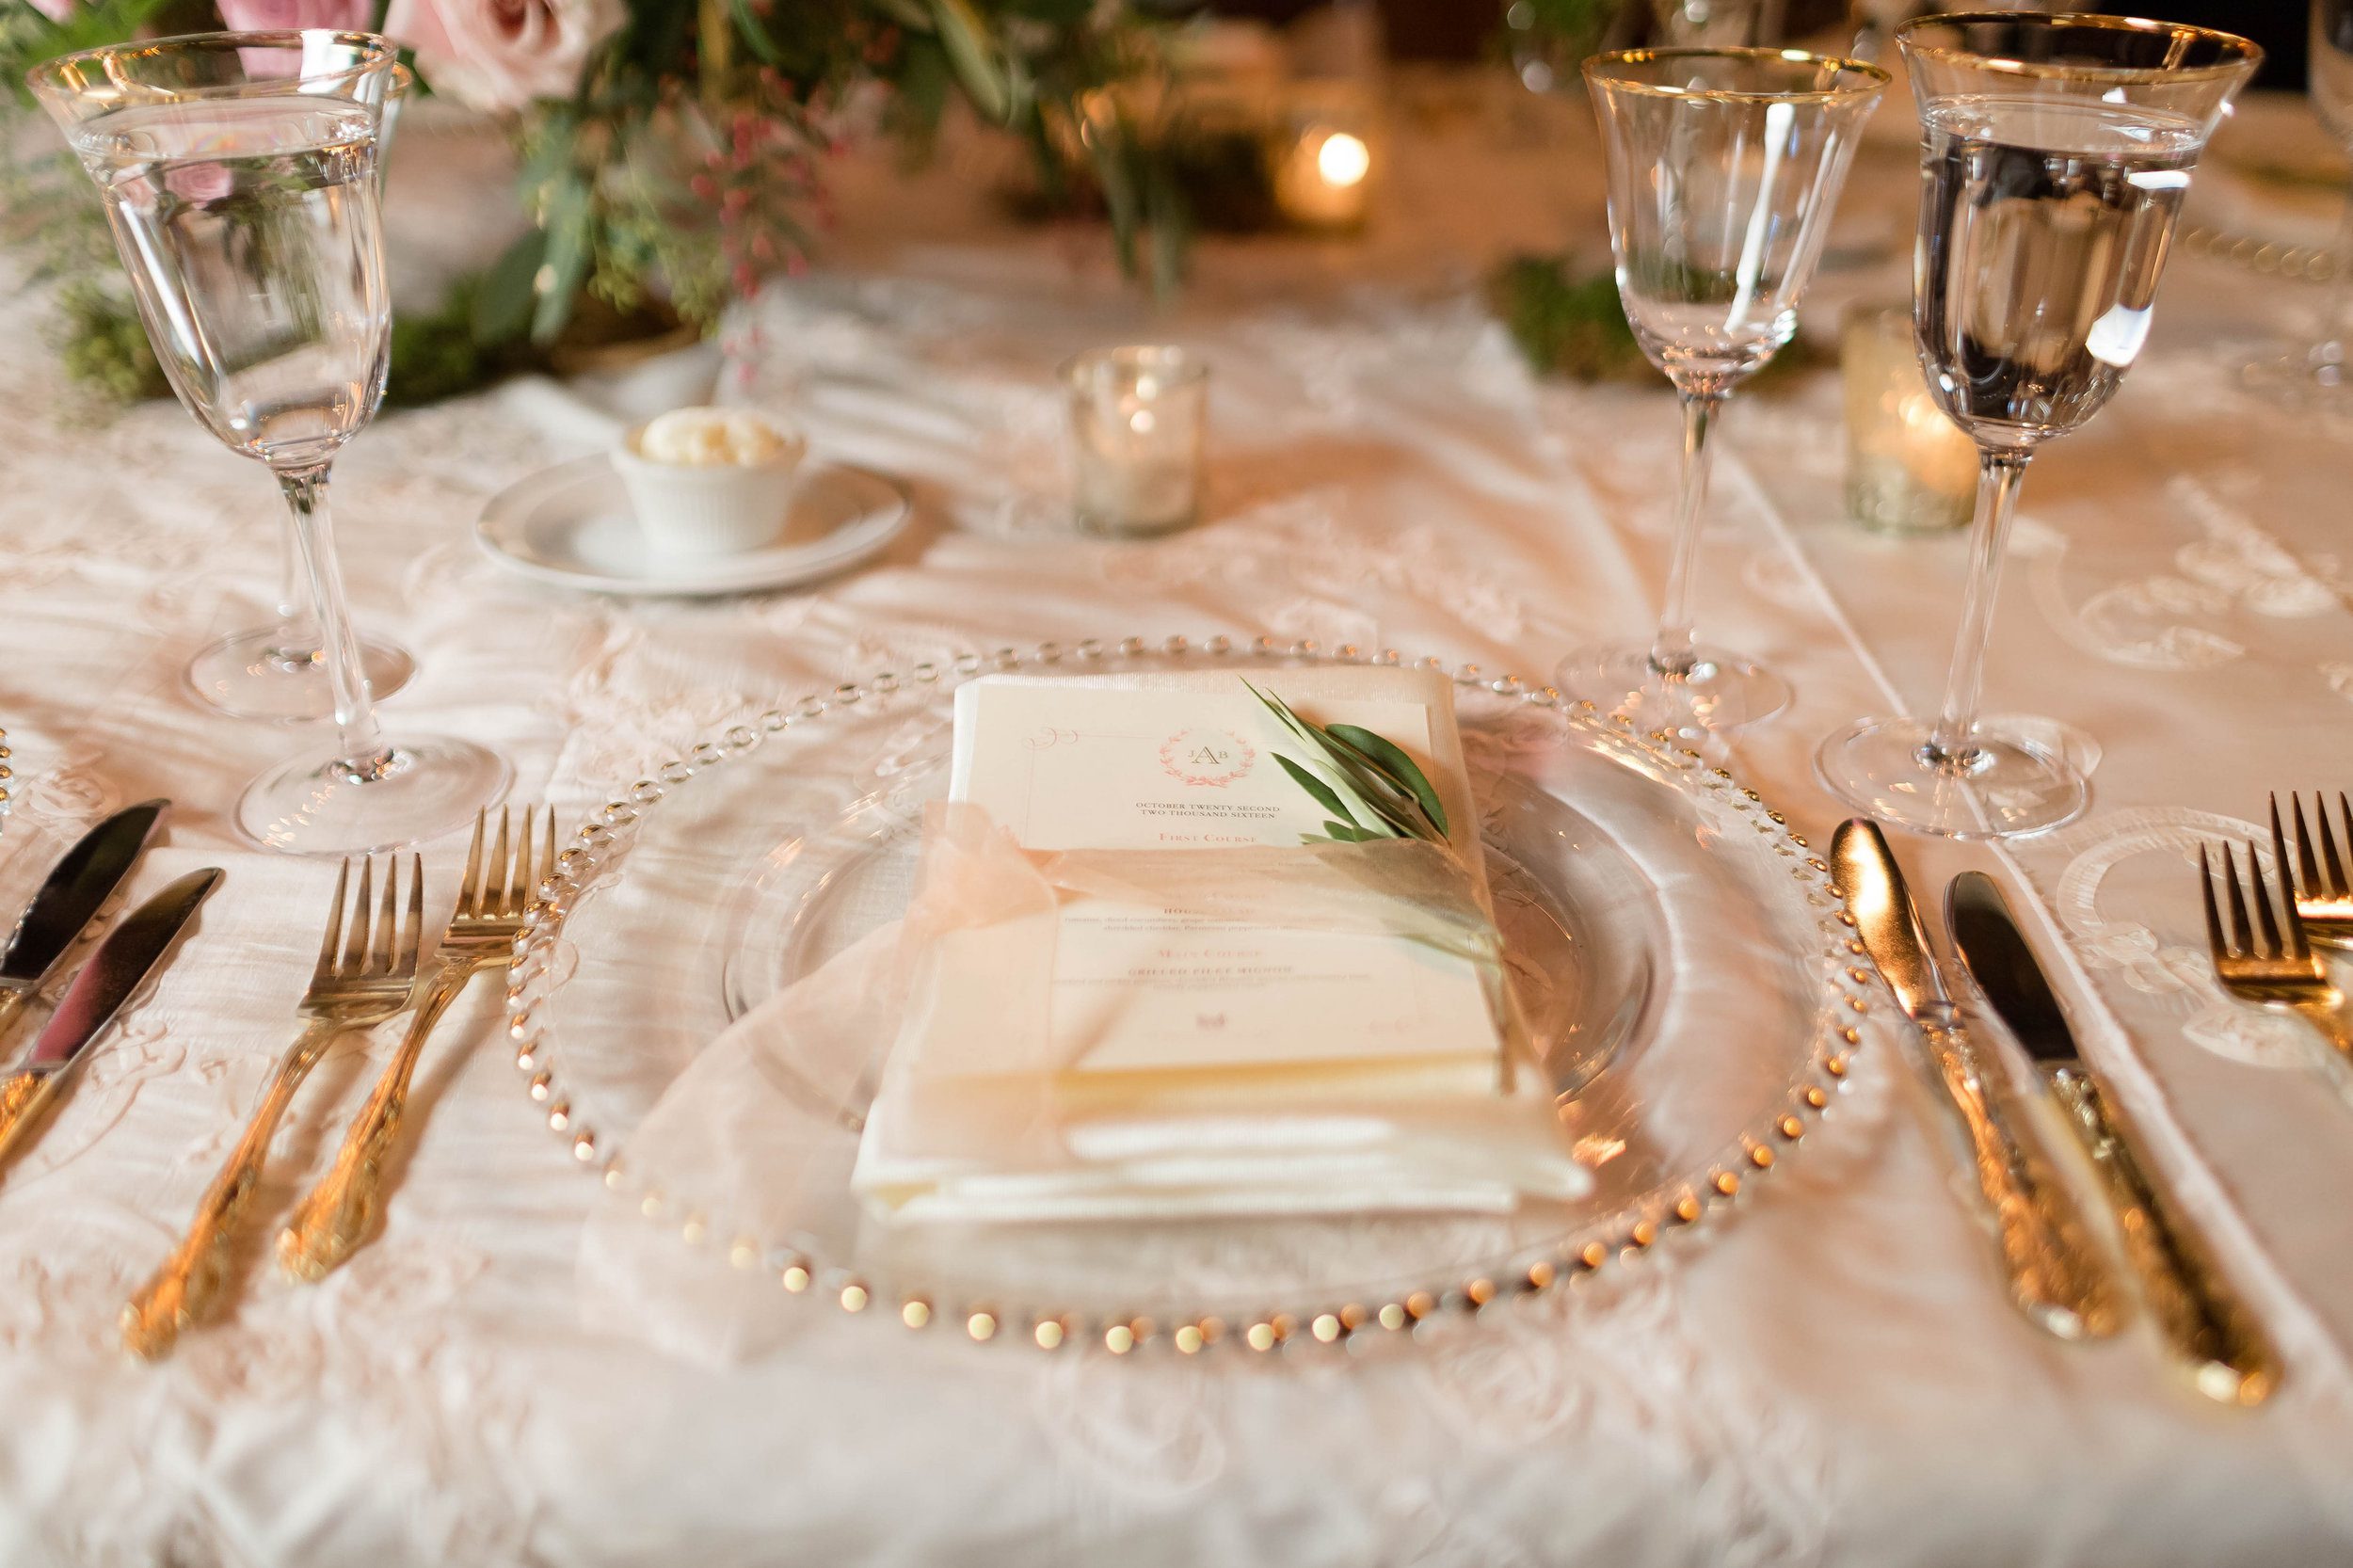 Place setting with Rosemary at Red Fox Inn in Middleburg, Virginia. Photography by Candice Adelle.